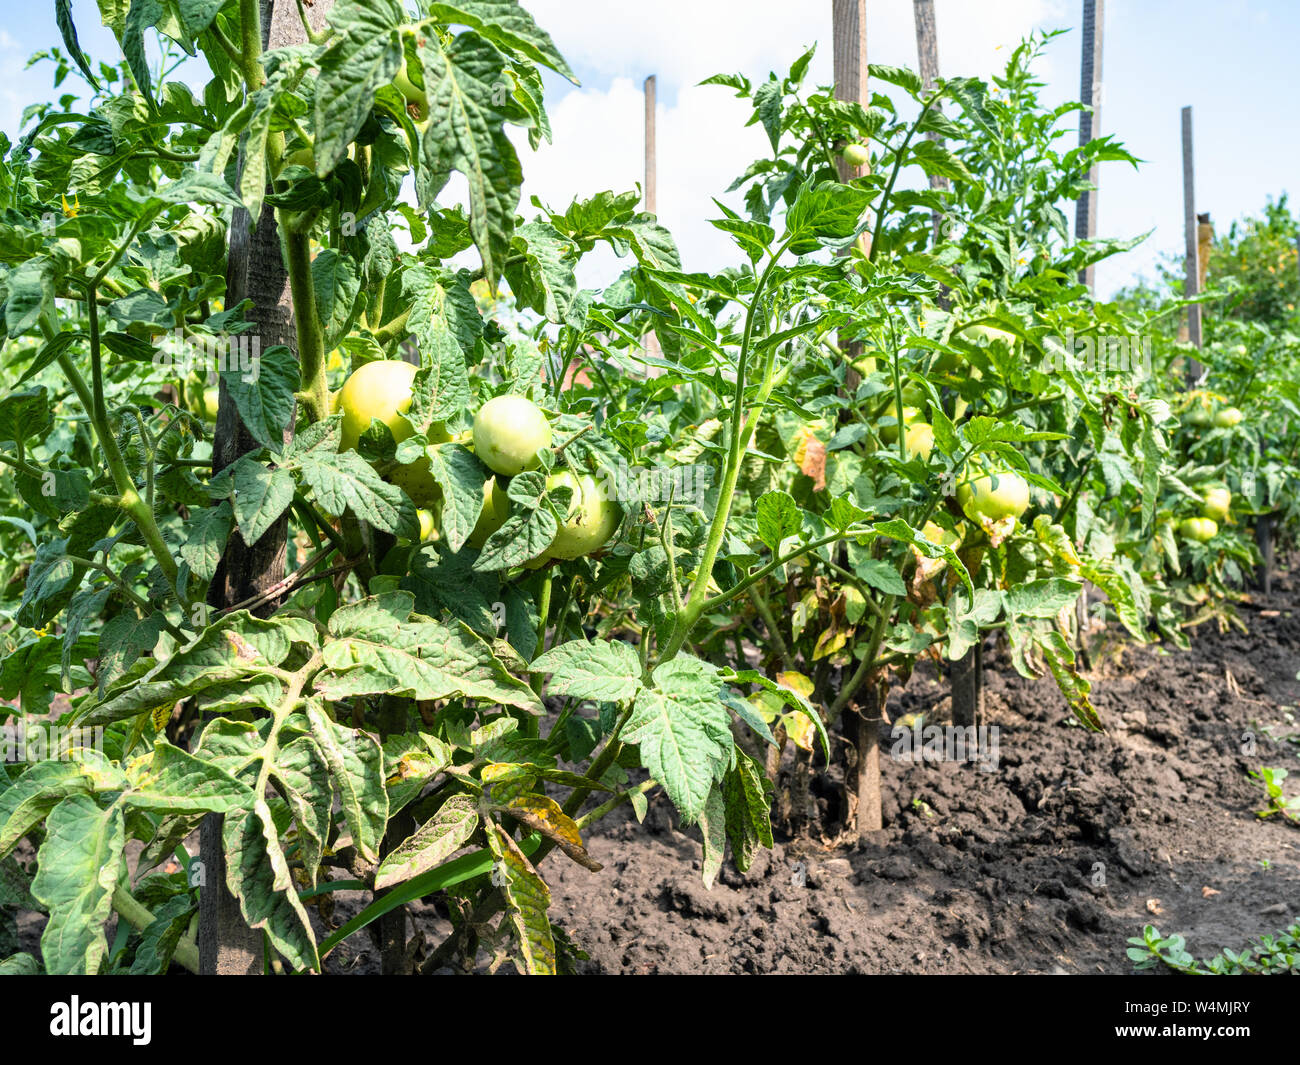 bushes with green unripe tomato fruits outdoors in garden in summer season Stock Photo